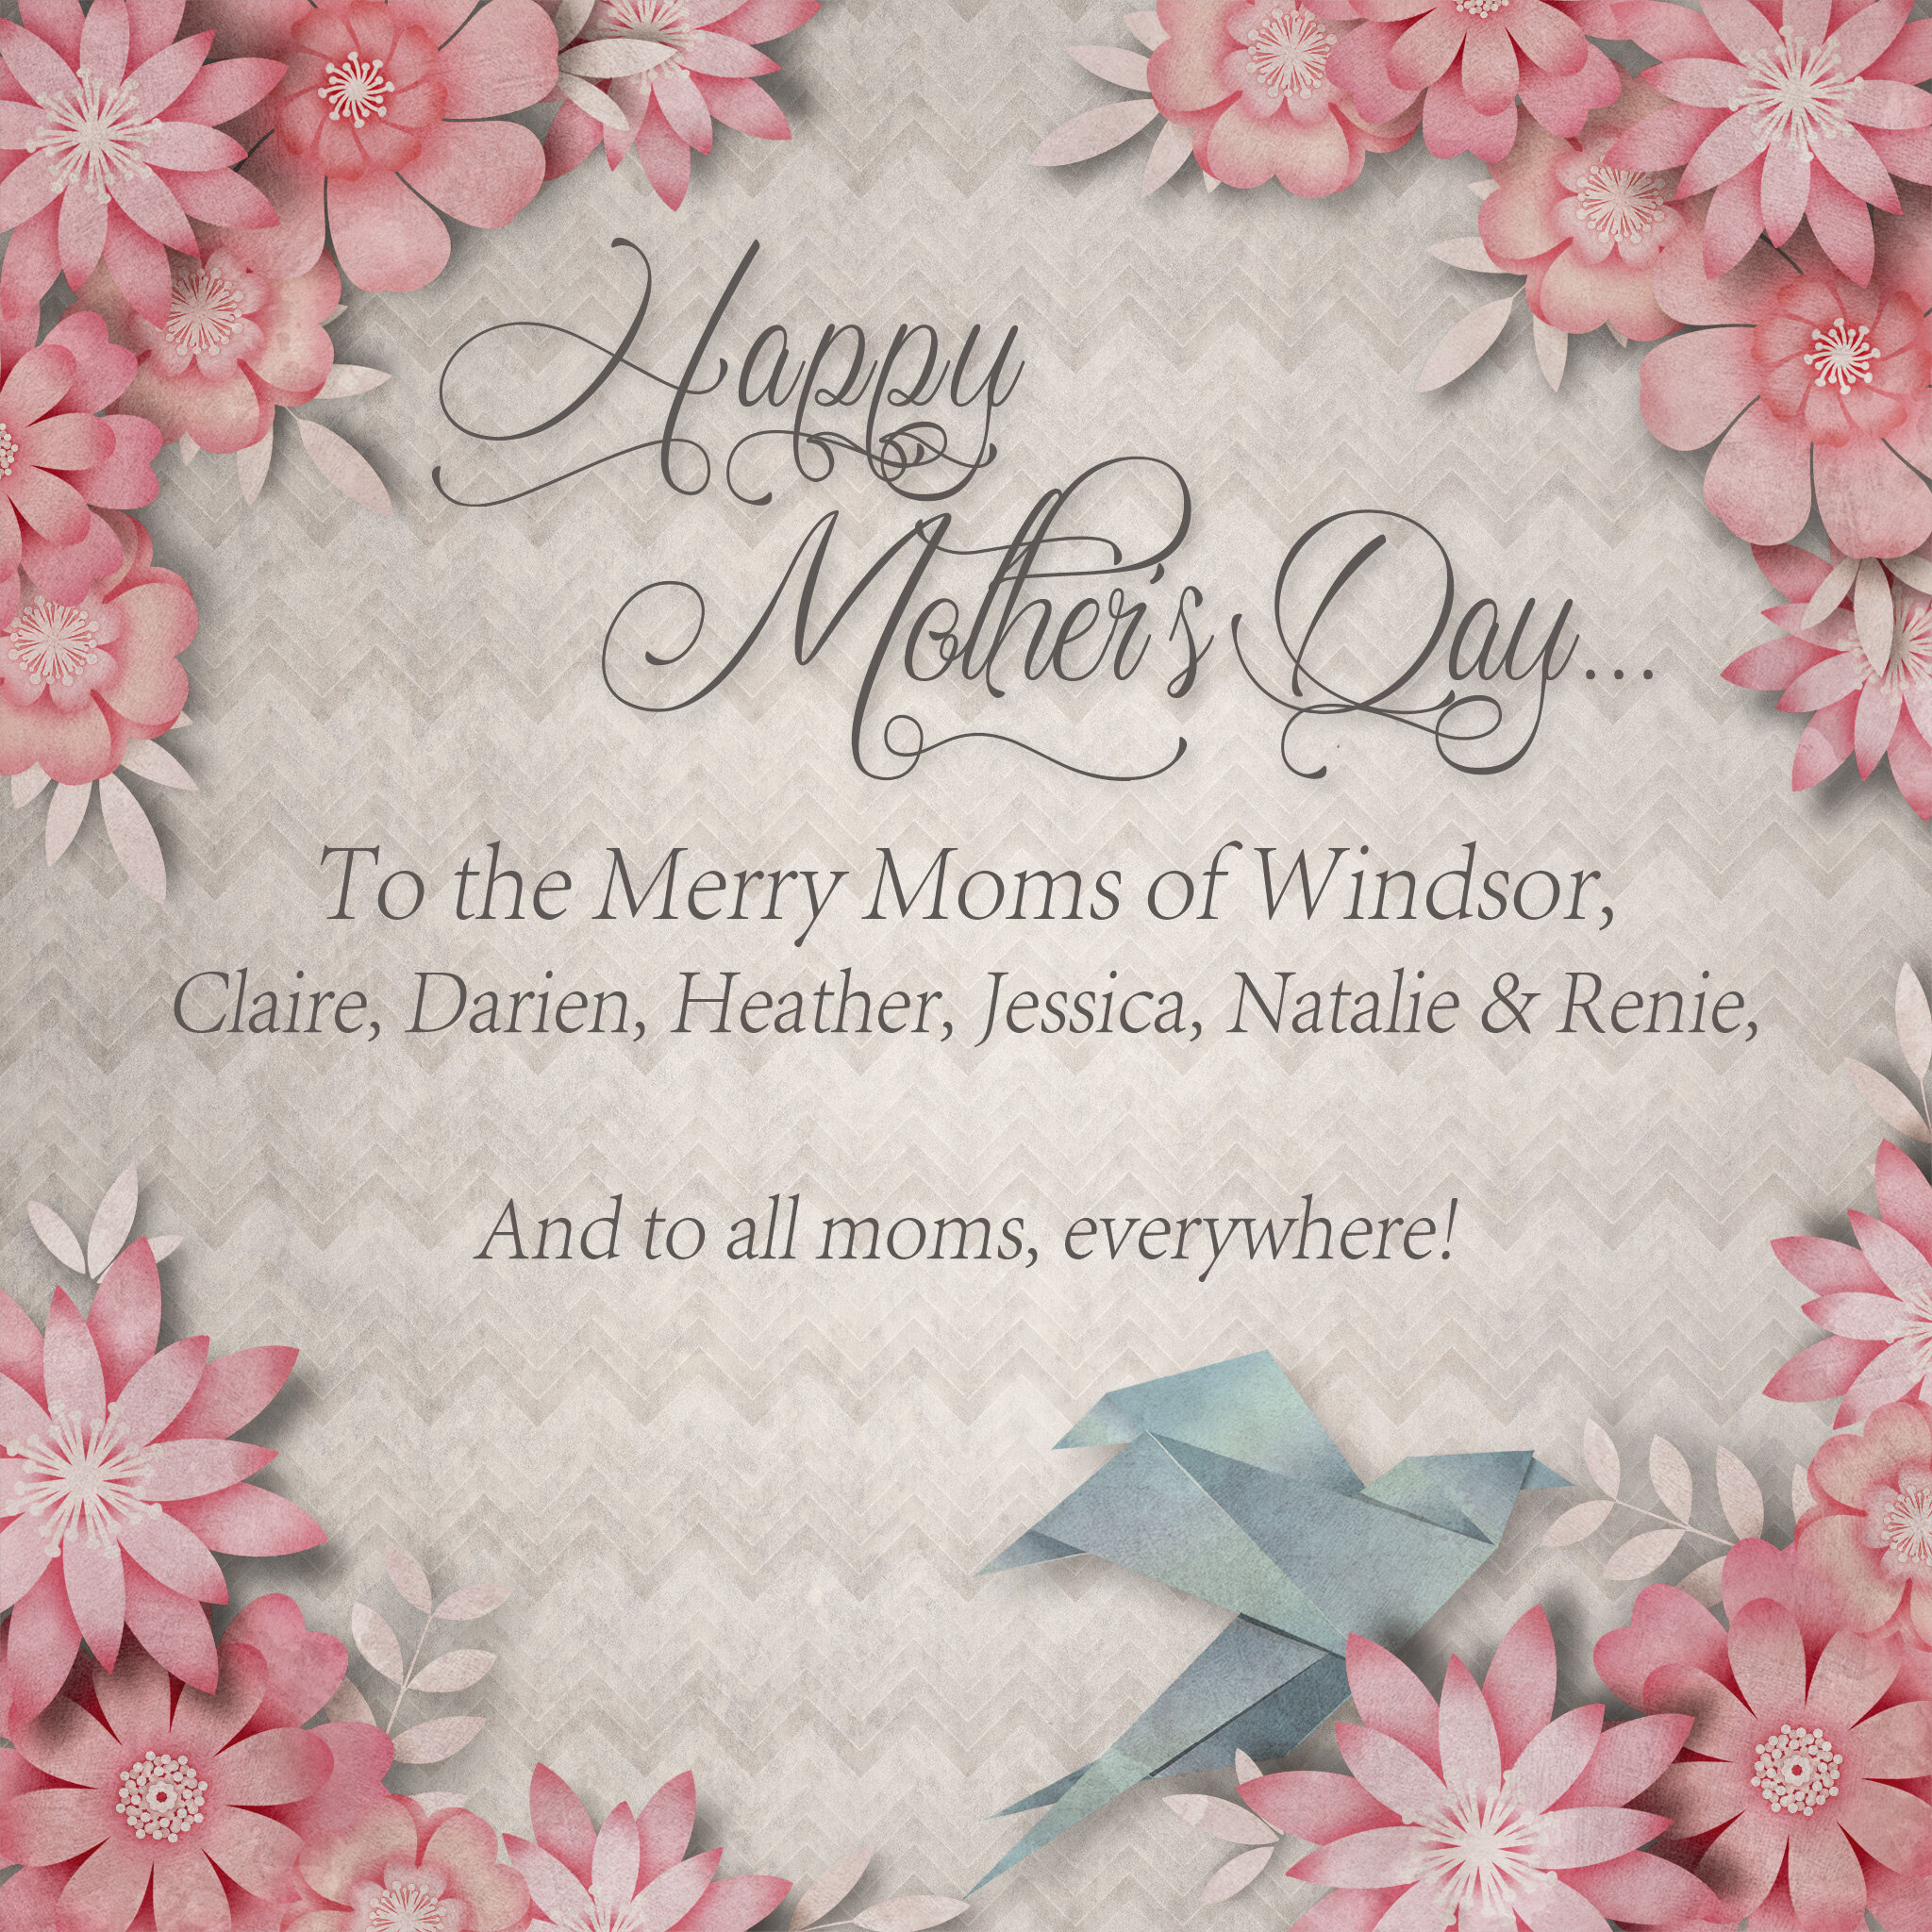 Happy Mother's Day from The Merry Wives! May your day be filled with love and all the people, places and things that bring you joy. 

#mothersday #mothers #mothersday2023